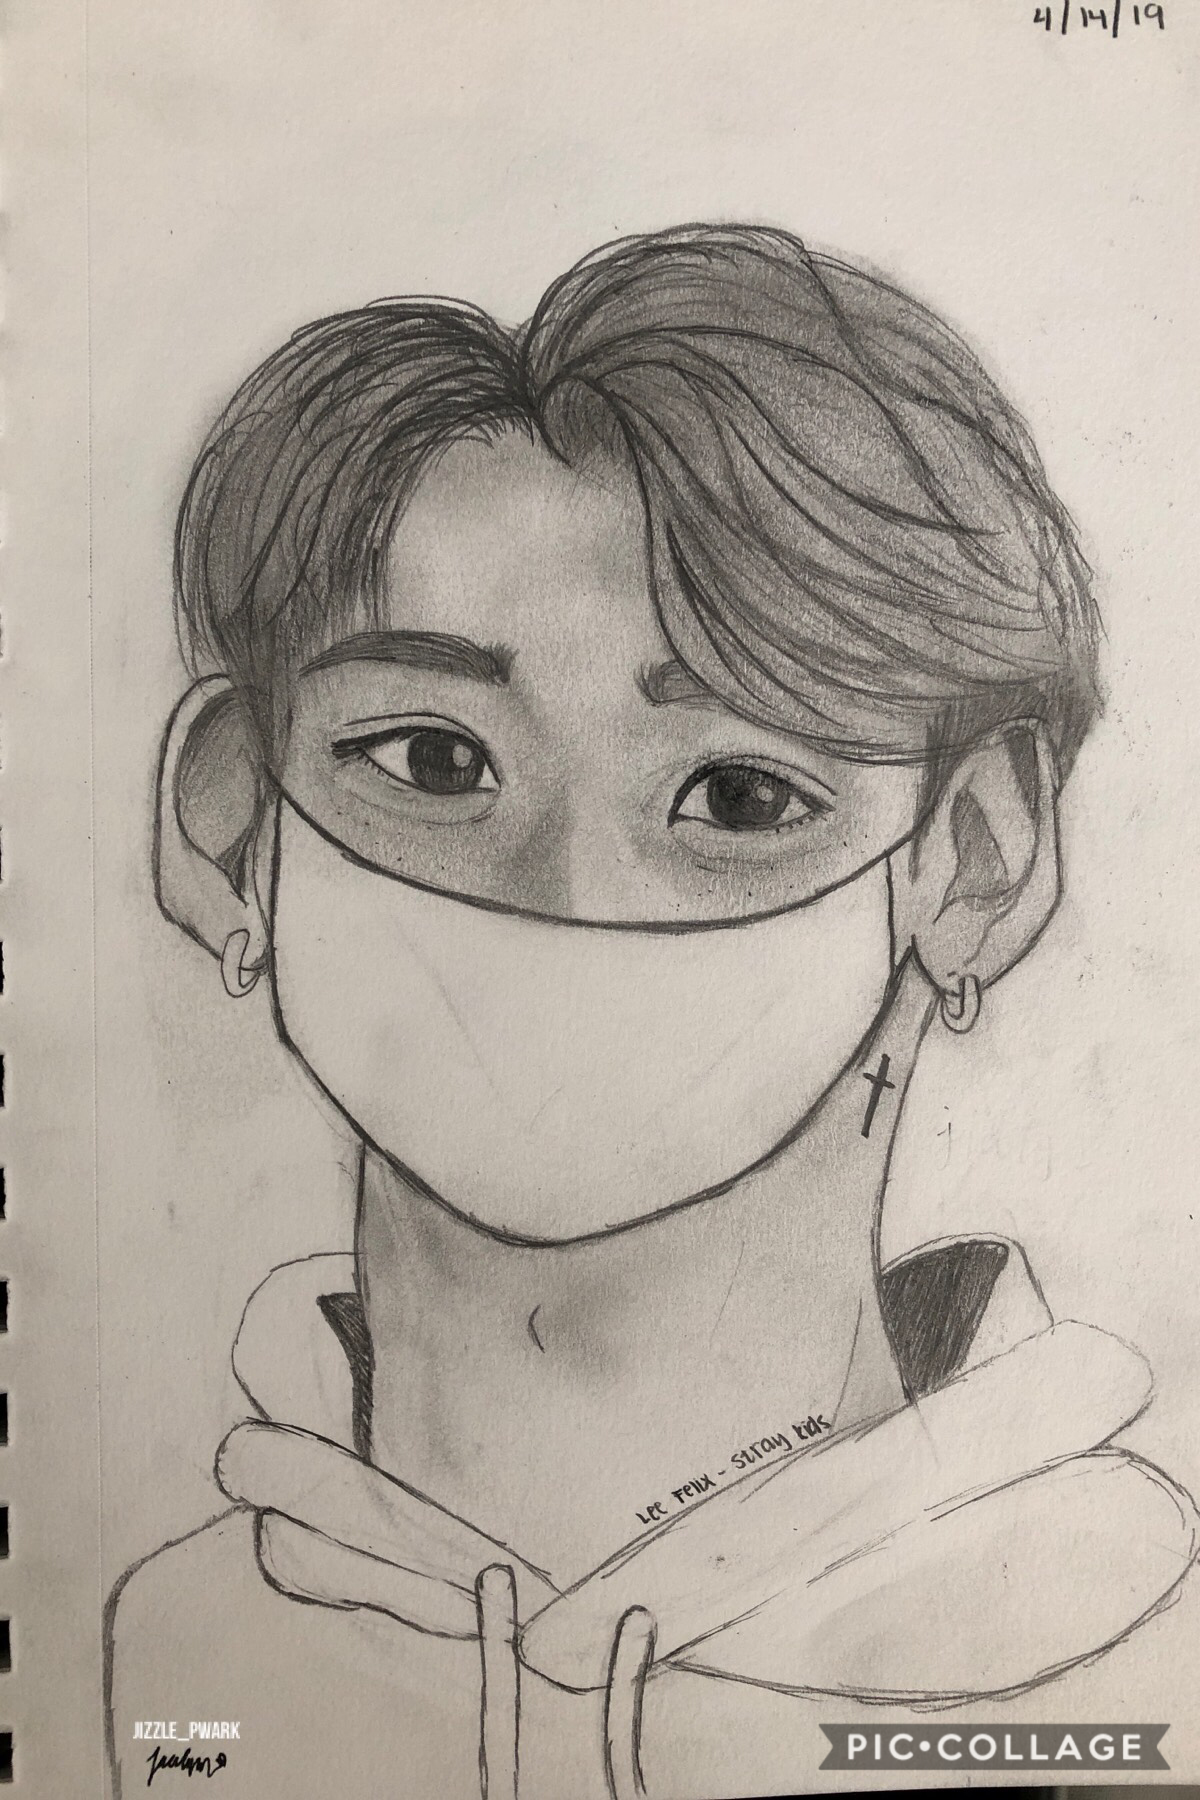 *UWU*
So I tried drawing Lucas from NCT but I think it looks like Felix from Stray Kids 😂😂😂 

You can see my name at the bottom uwu. 

Who do you think it looks like?